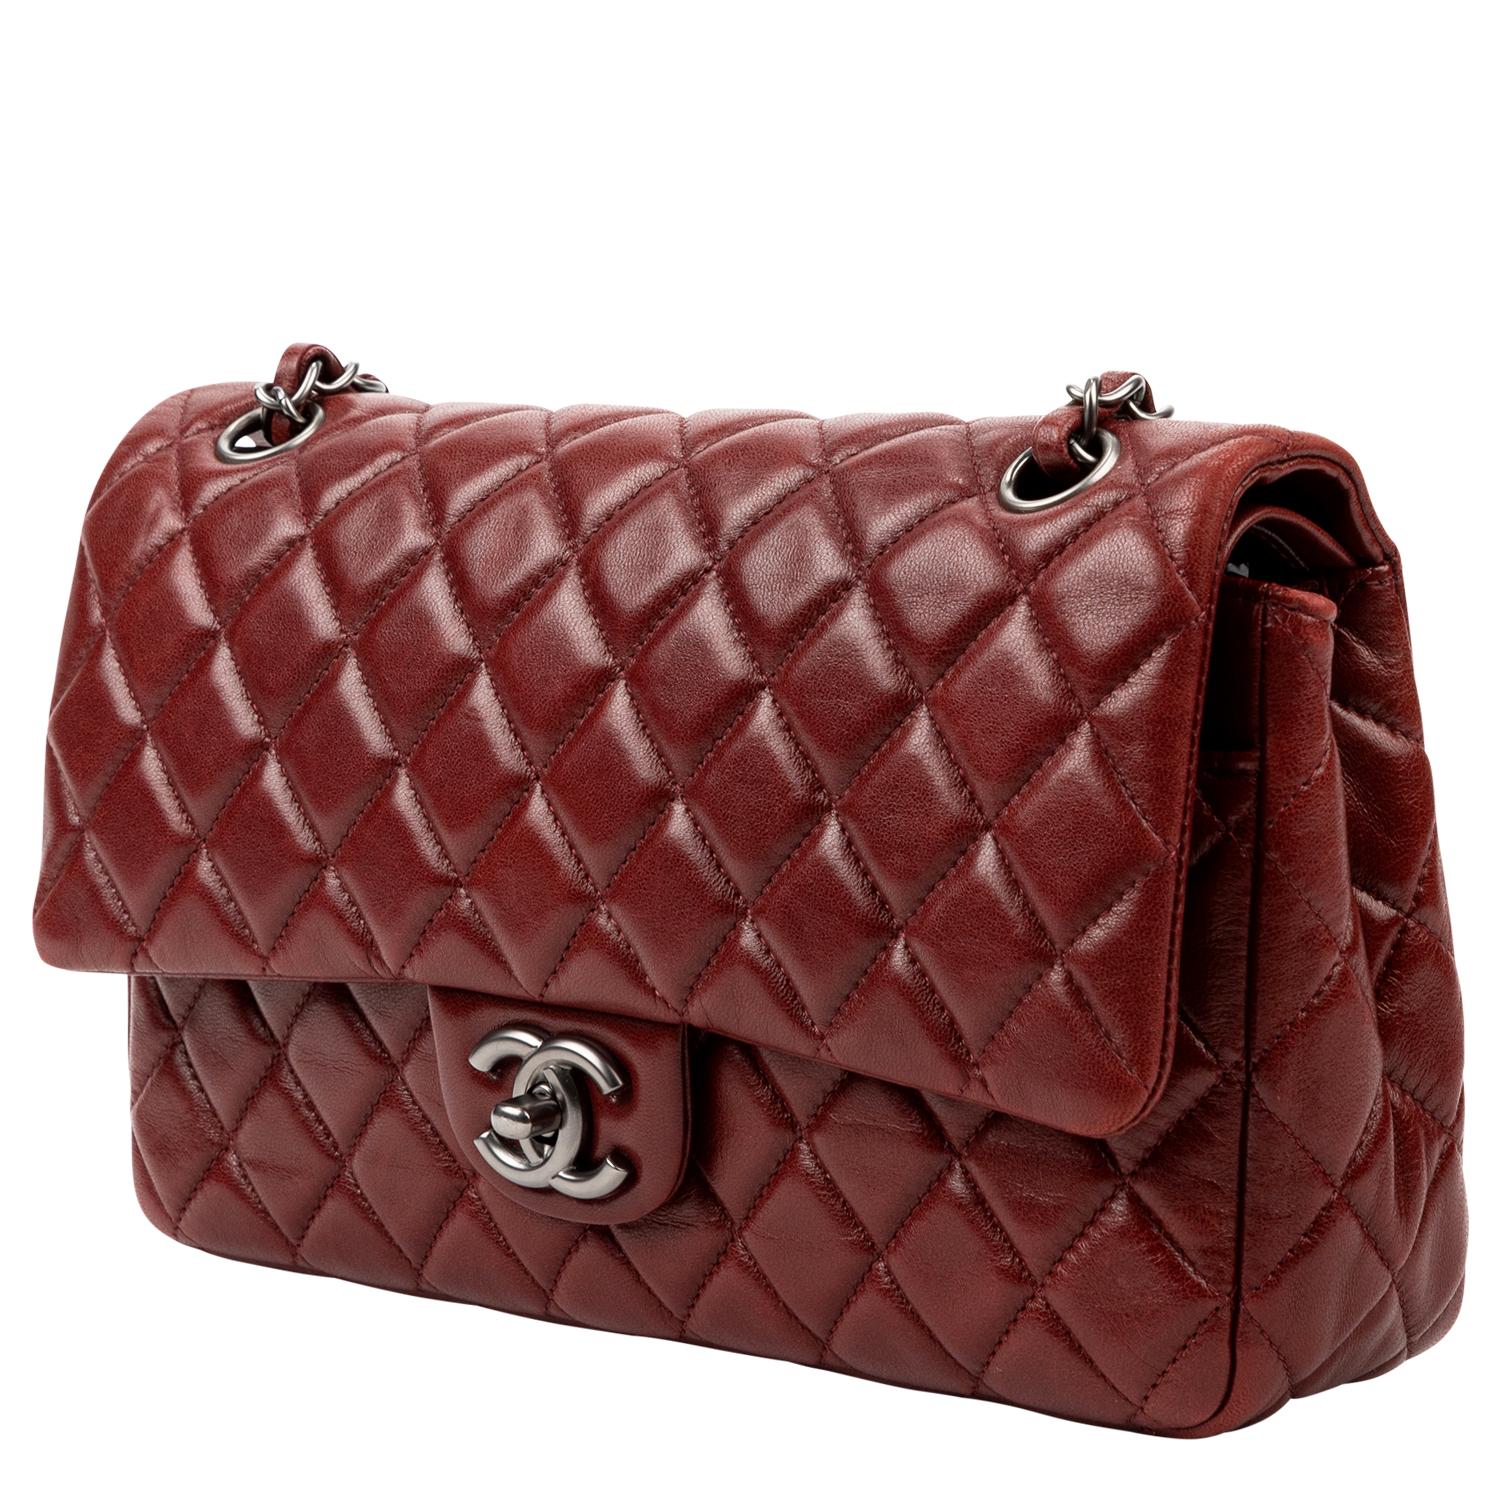 As classic as it gets but edgy at the same time! This mid 2000s vintage beauty is crafted in gorgeous burgundy lambskin leather, silver-tone hardware, with a convertible chain-link and leather strap. The iconic CC turnlock closure opens to so a